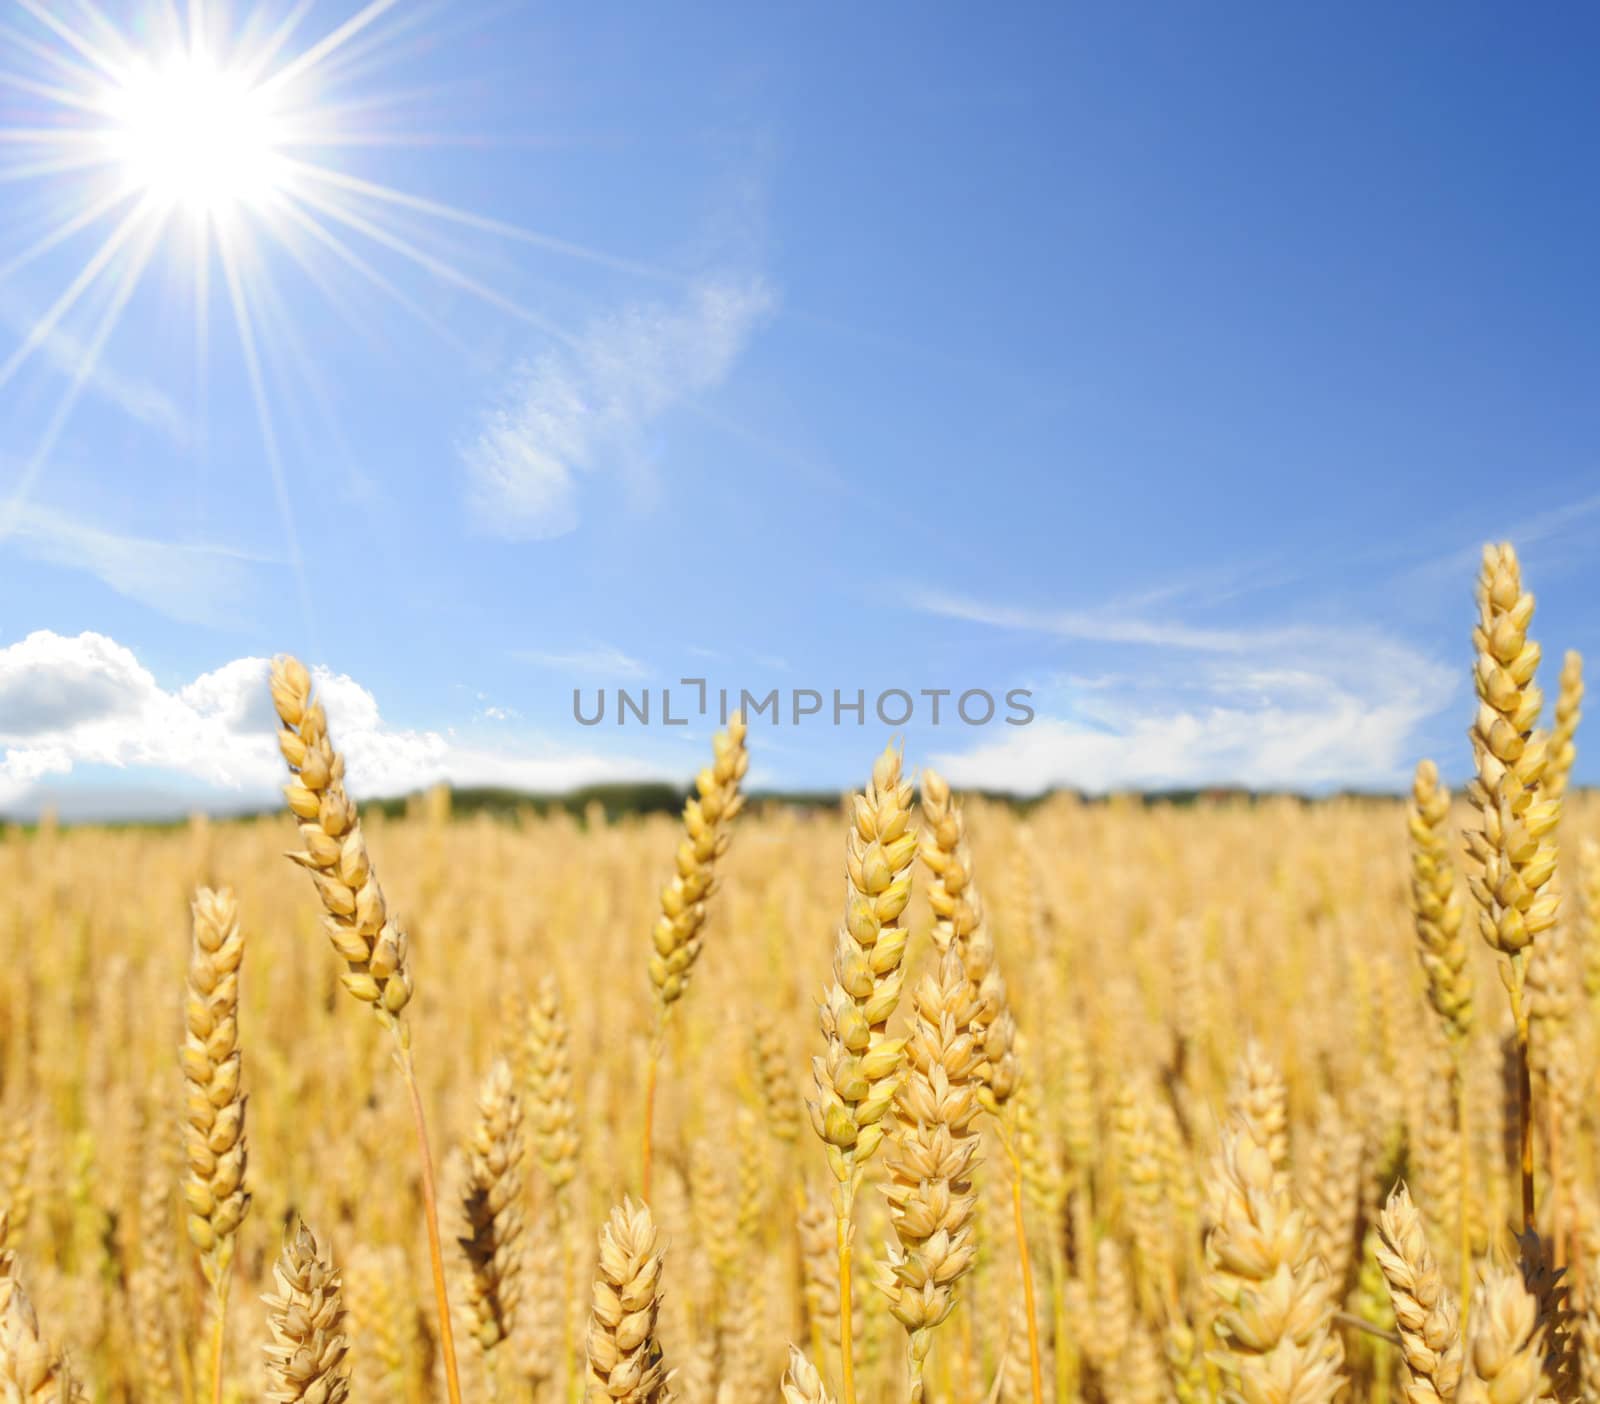 Perfect sunny day out on the wheat field